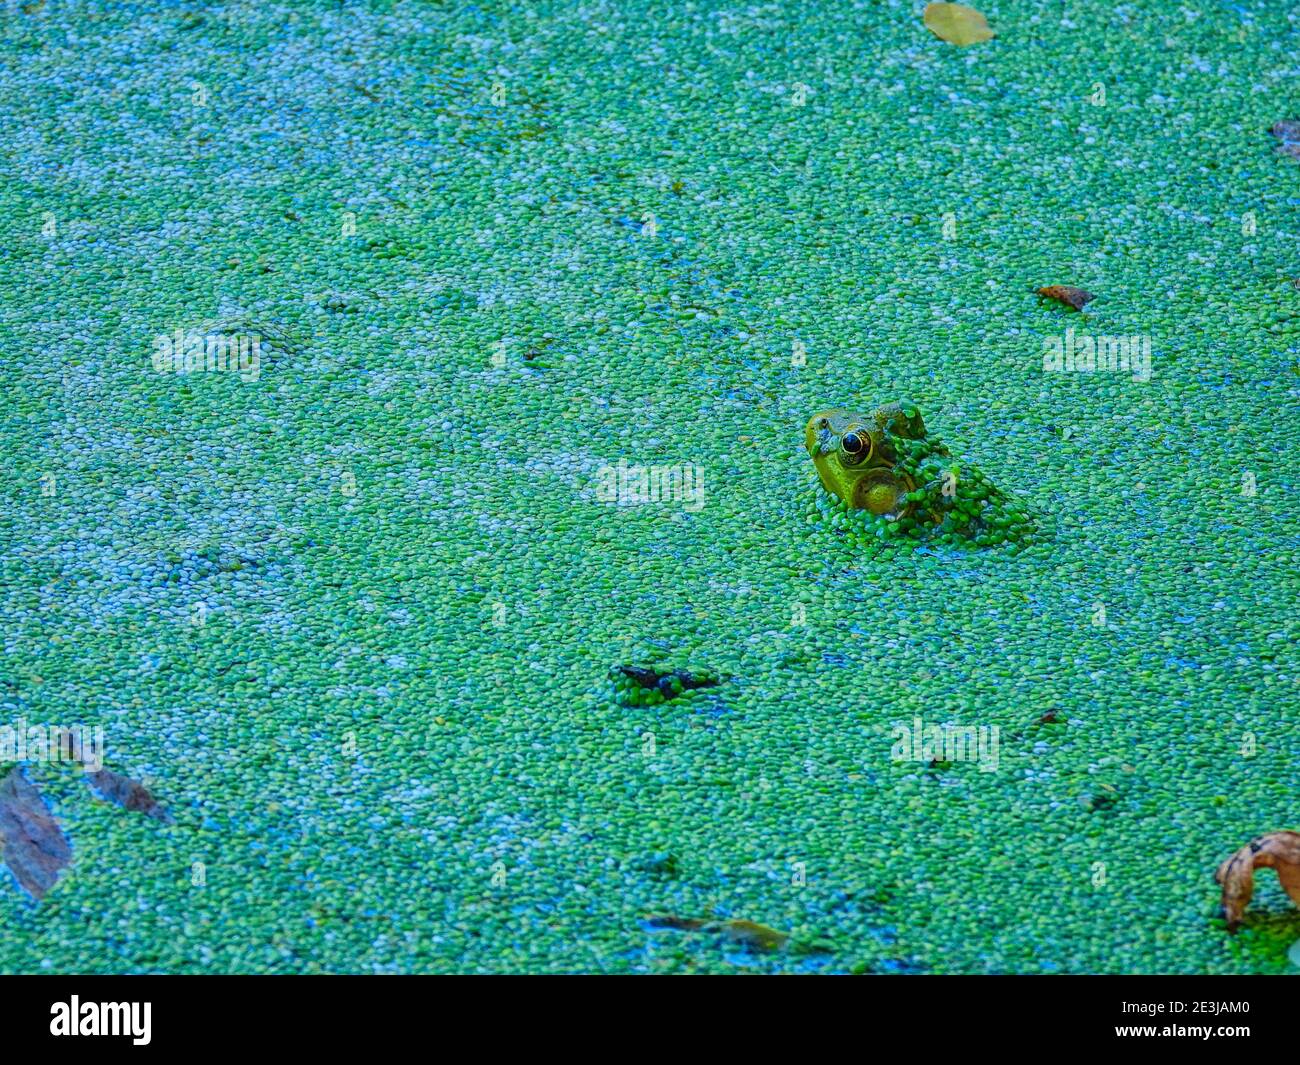 Frog in a pond: A bullfrog sits looking away in a shallow pond filled with a duckweed growth on the surface while its eyes, nose and ears are visible Stock Photo